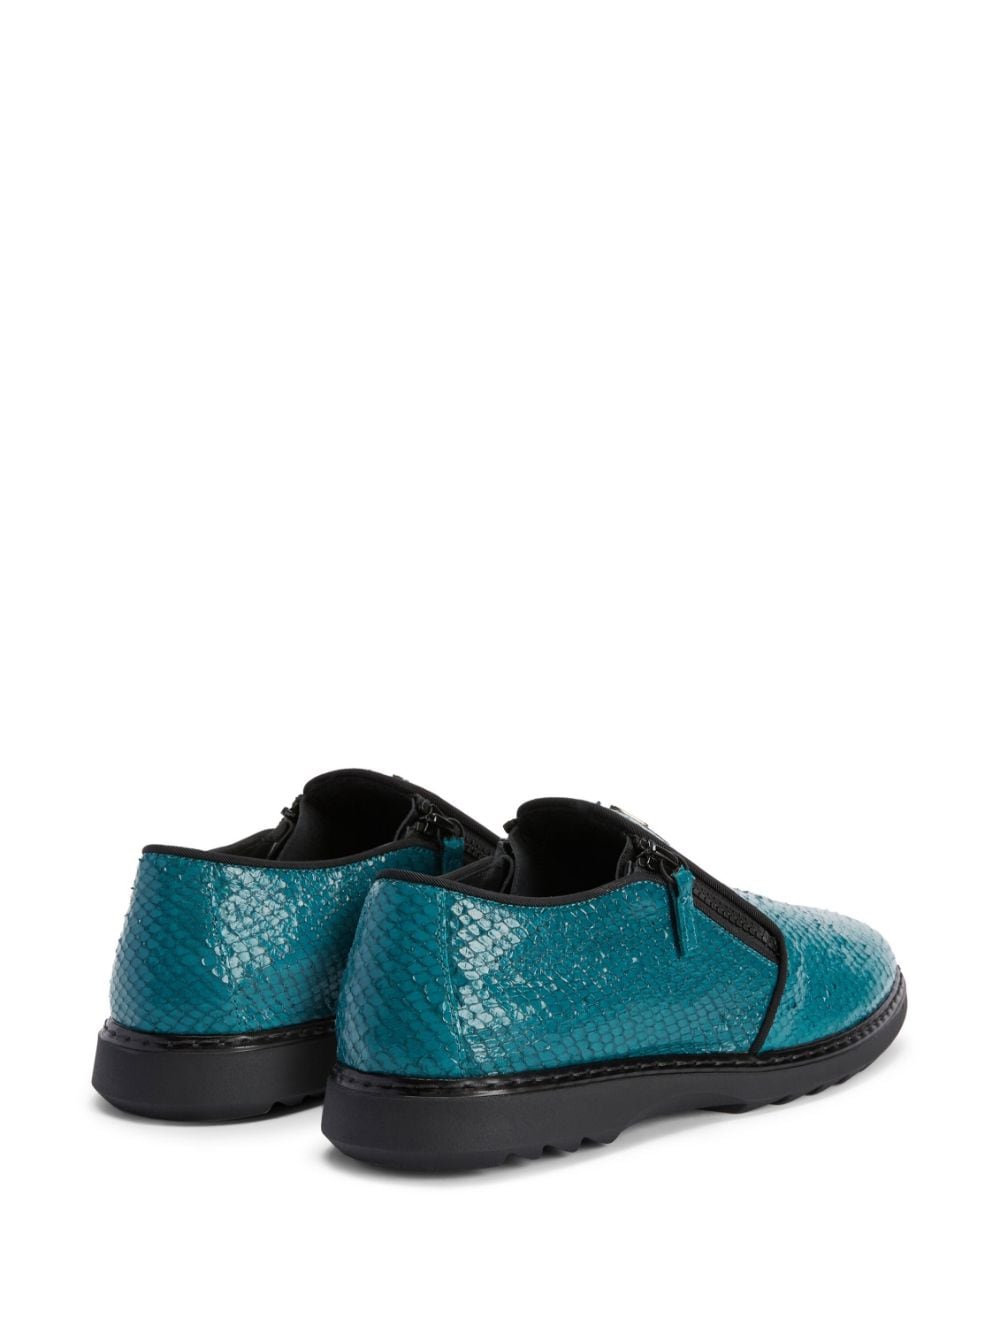 SNAKE-SKIN EFFECT LEATHER LOAFERS